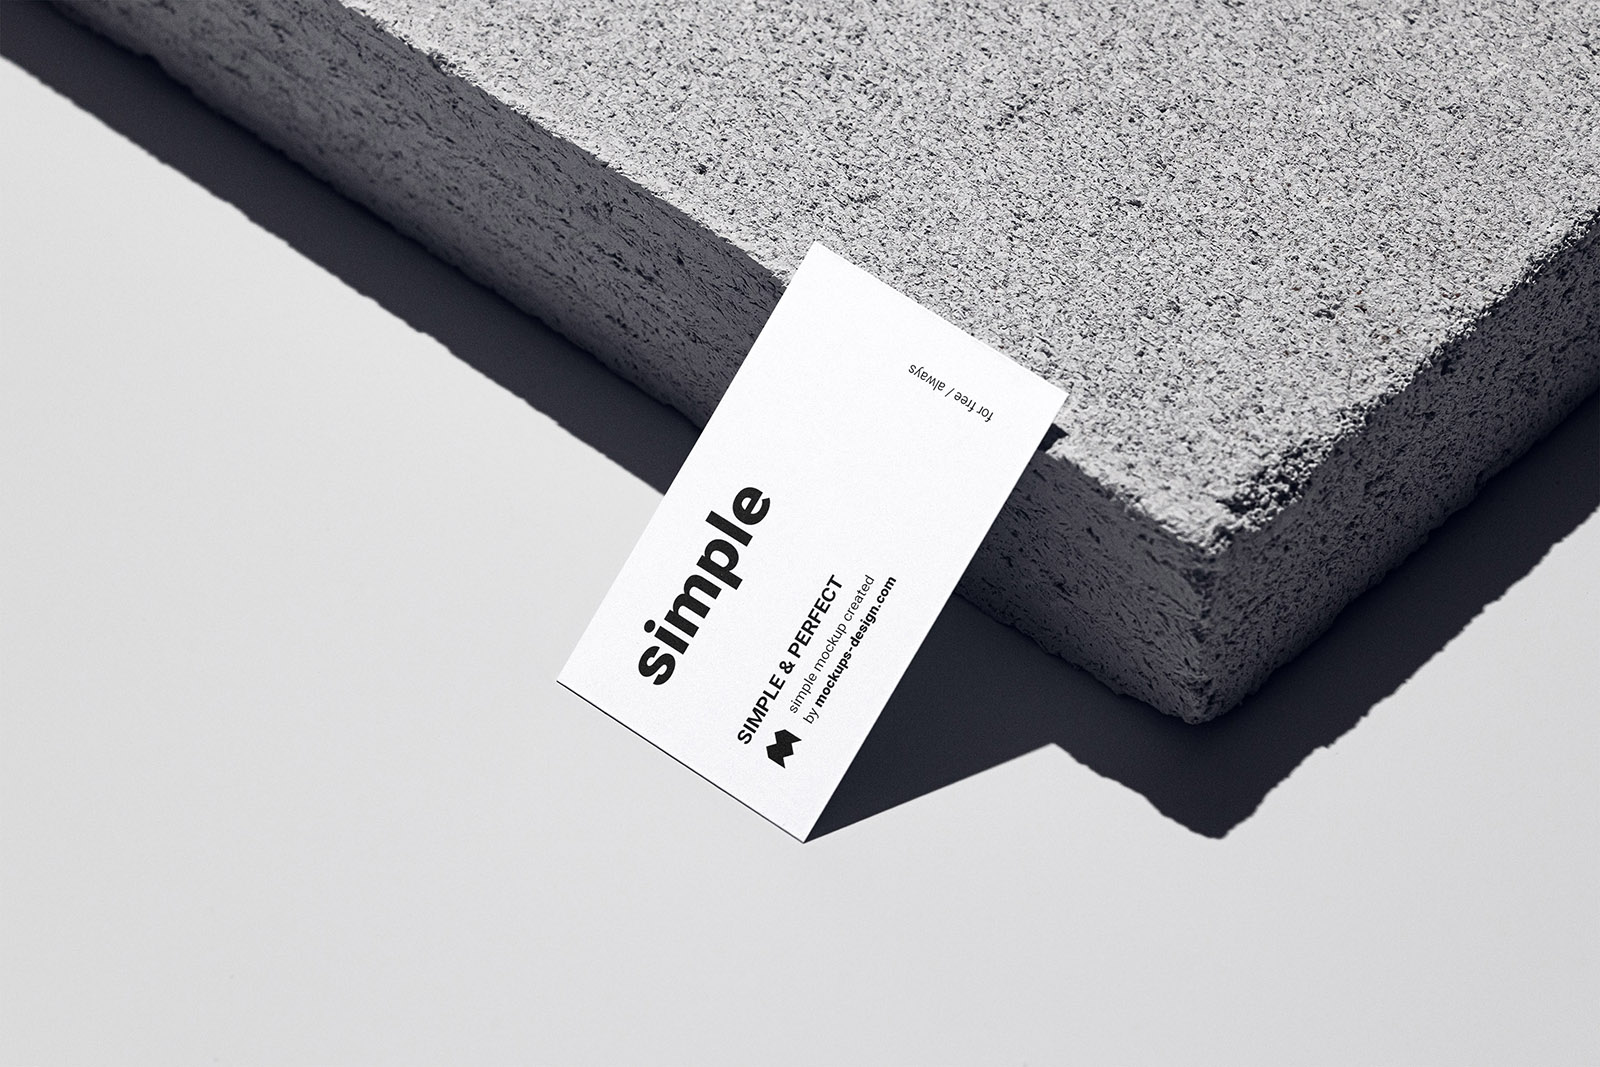 Concrete and business card mockup